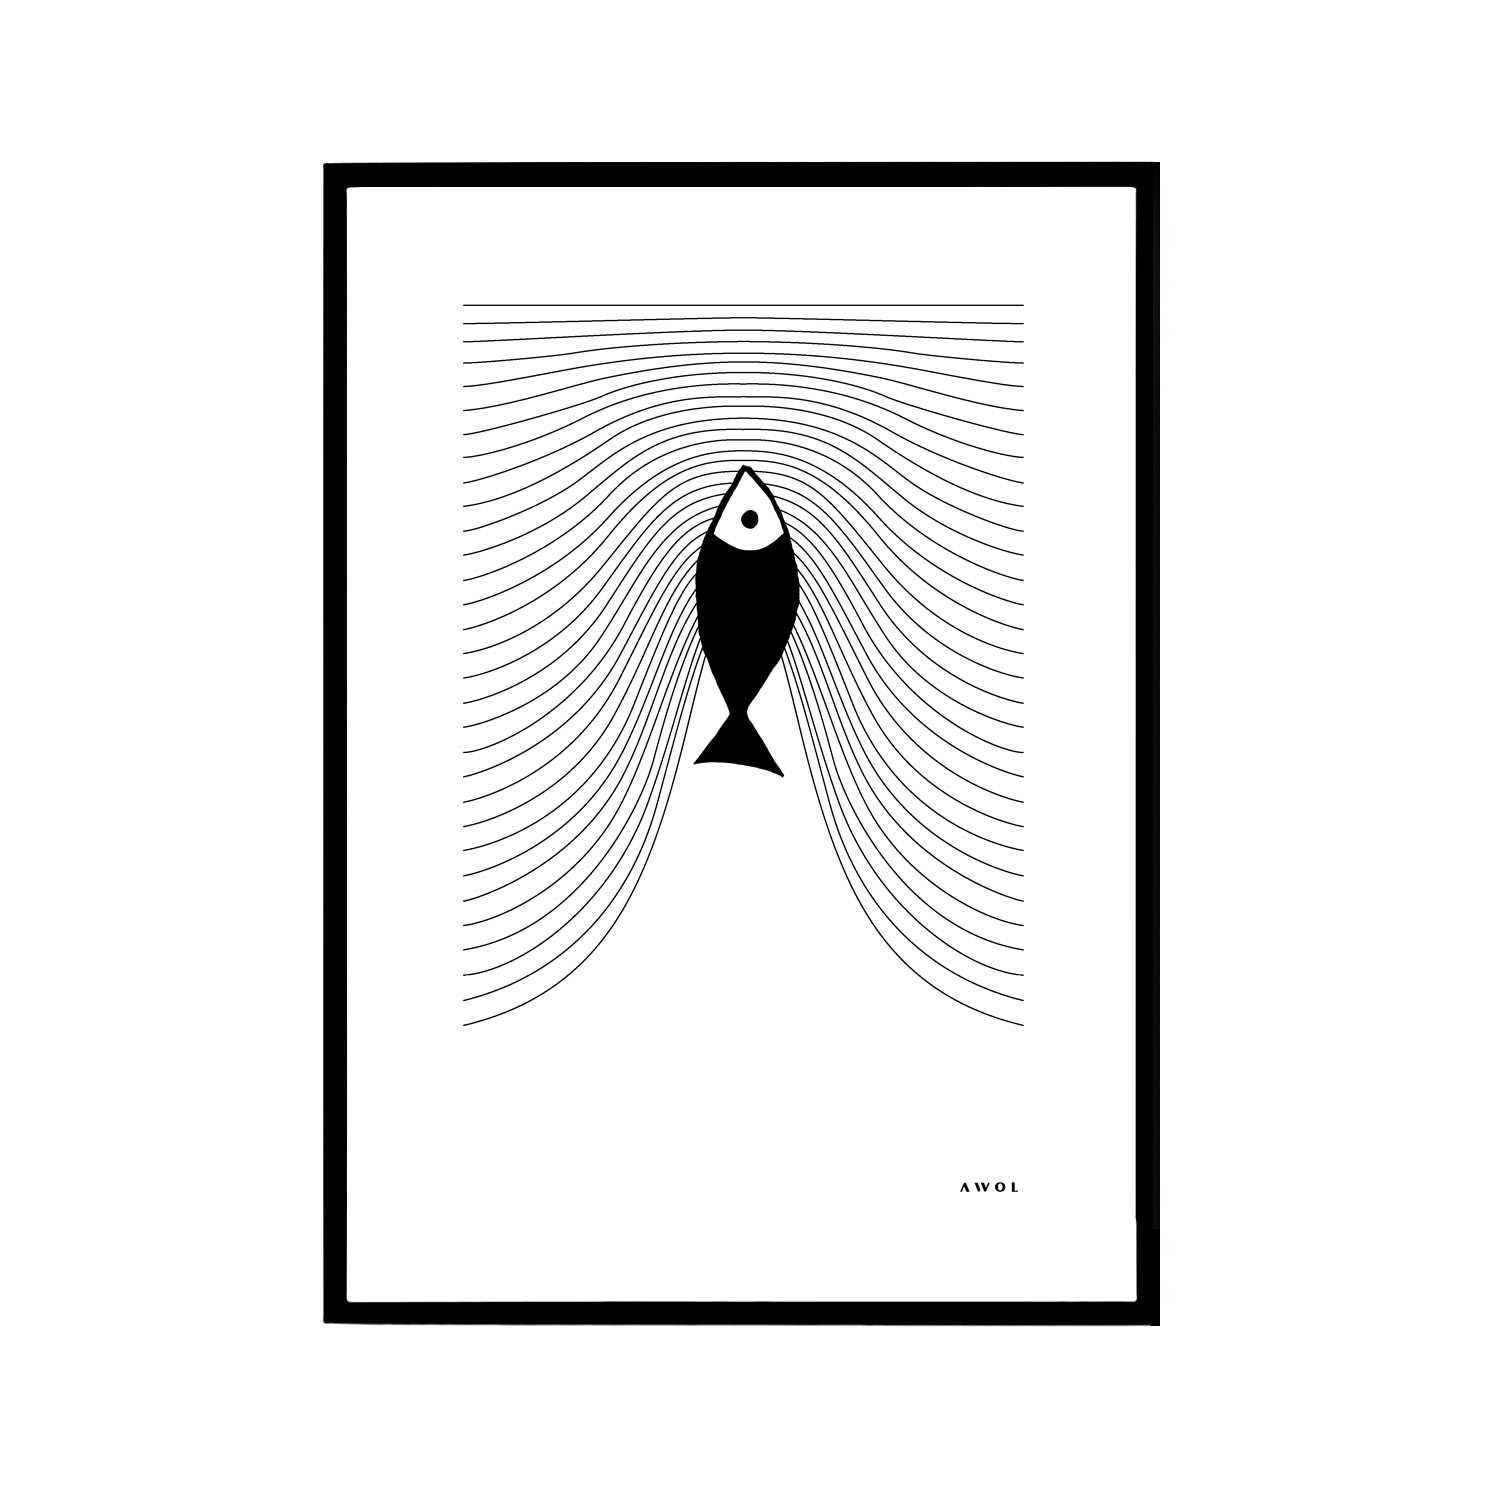 Black / White Plenty Of Fish In The Sea: Graphic Fish Art Print With Minimalist Line Wave Pattern Awol